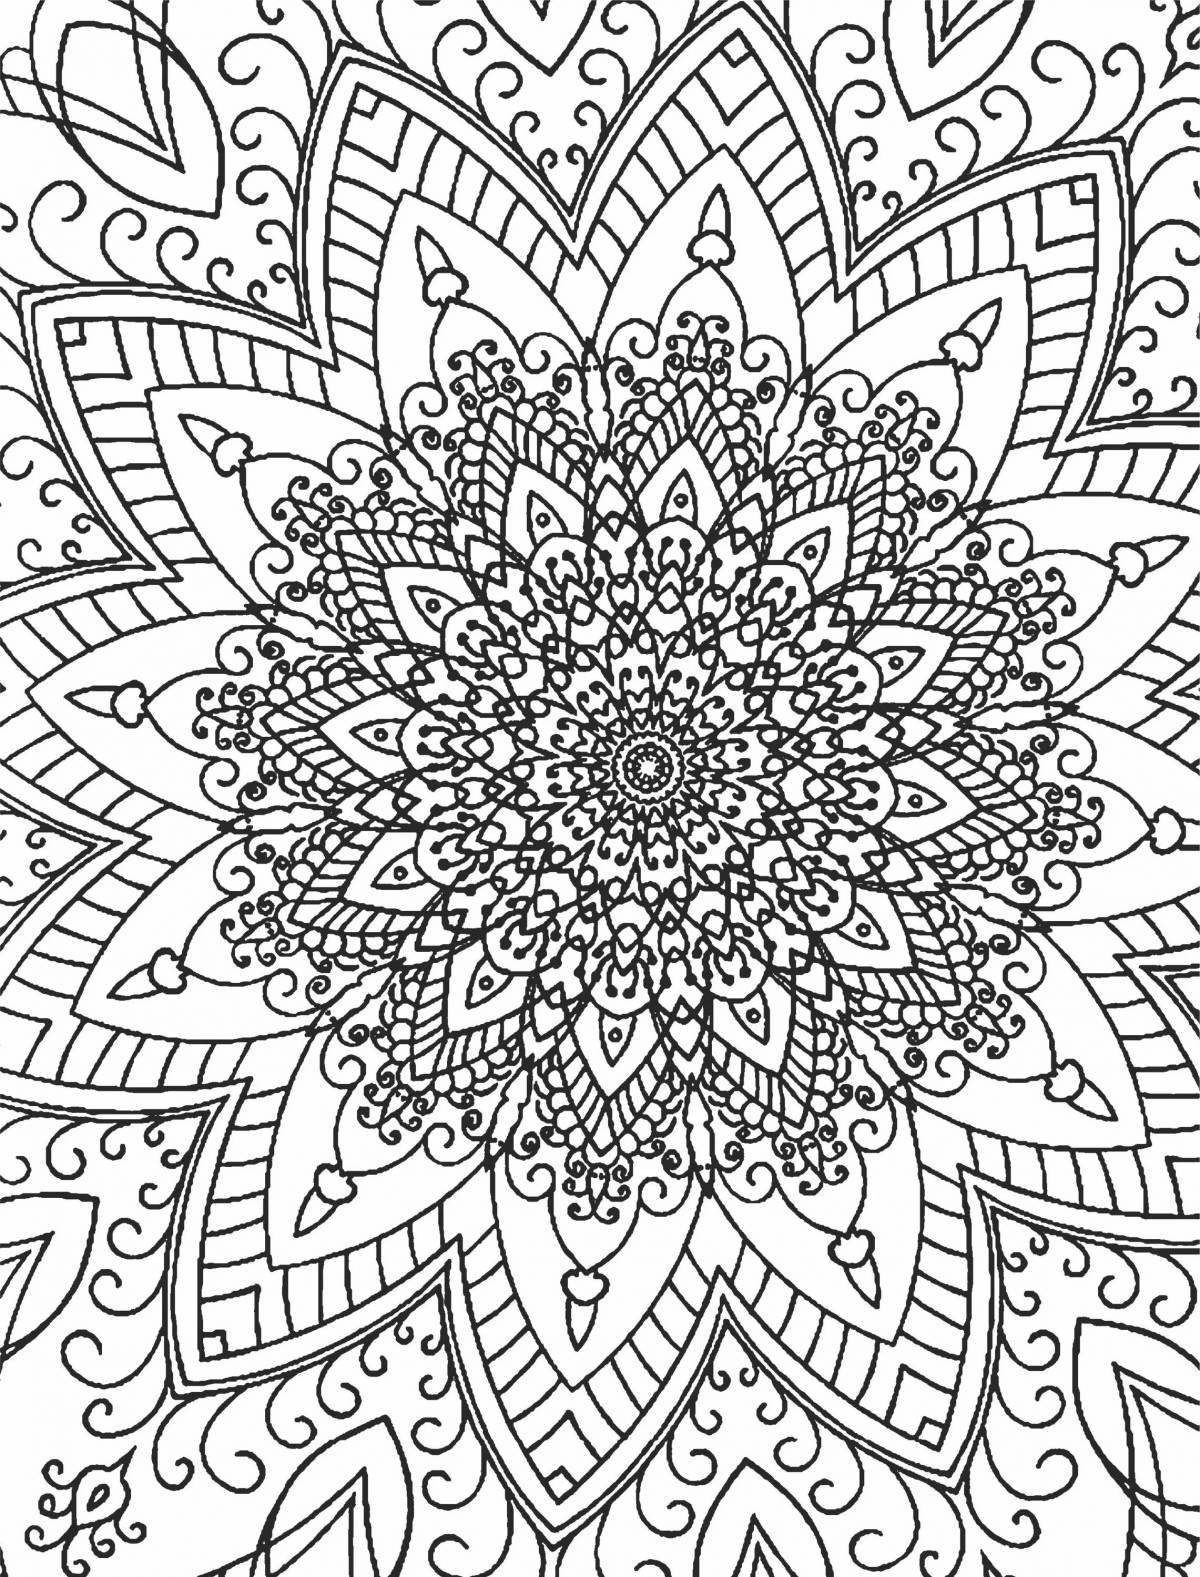 Coloring page with intricate patterns - exquisite